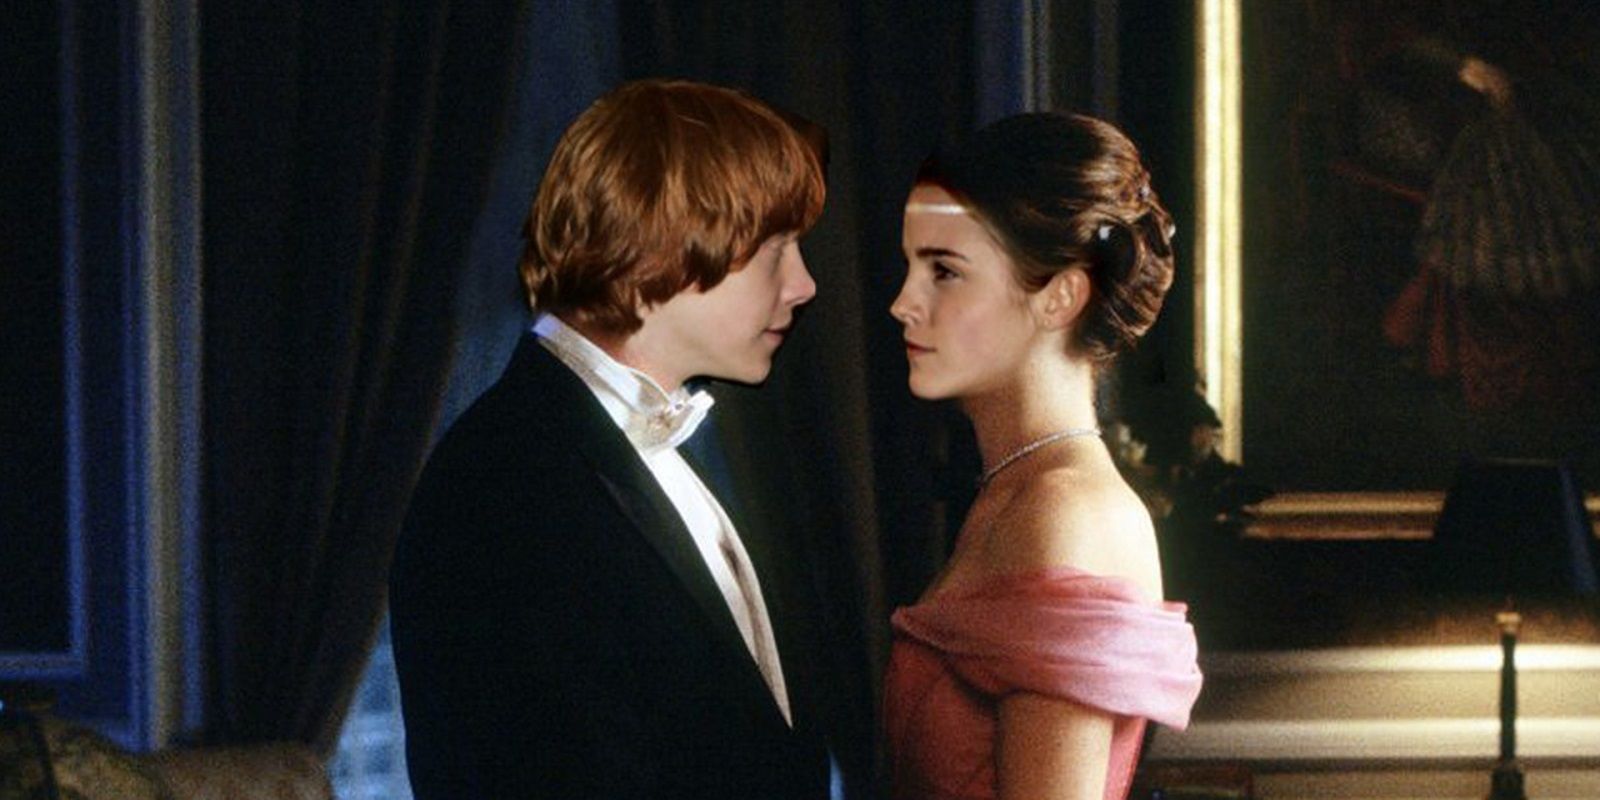 Ron and Hermione - Things You Didn't Know About Harry Potter